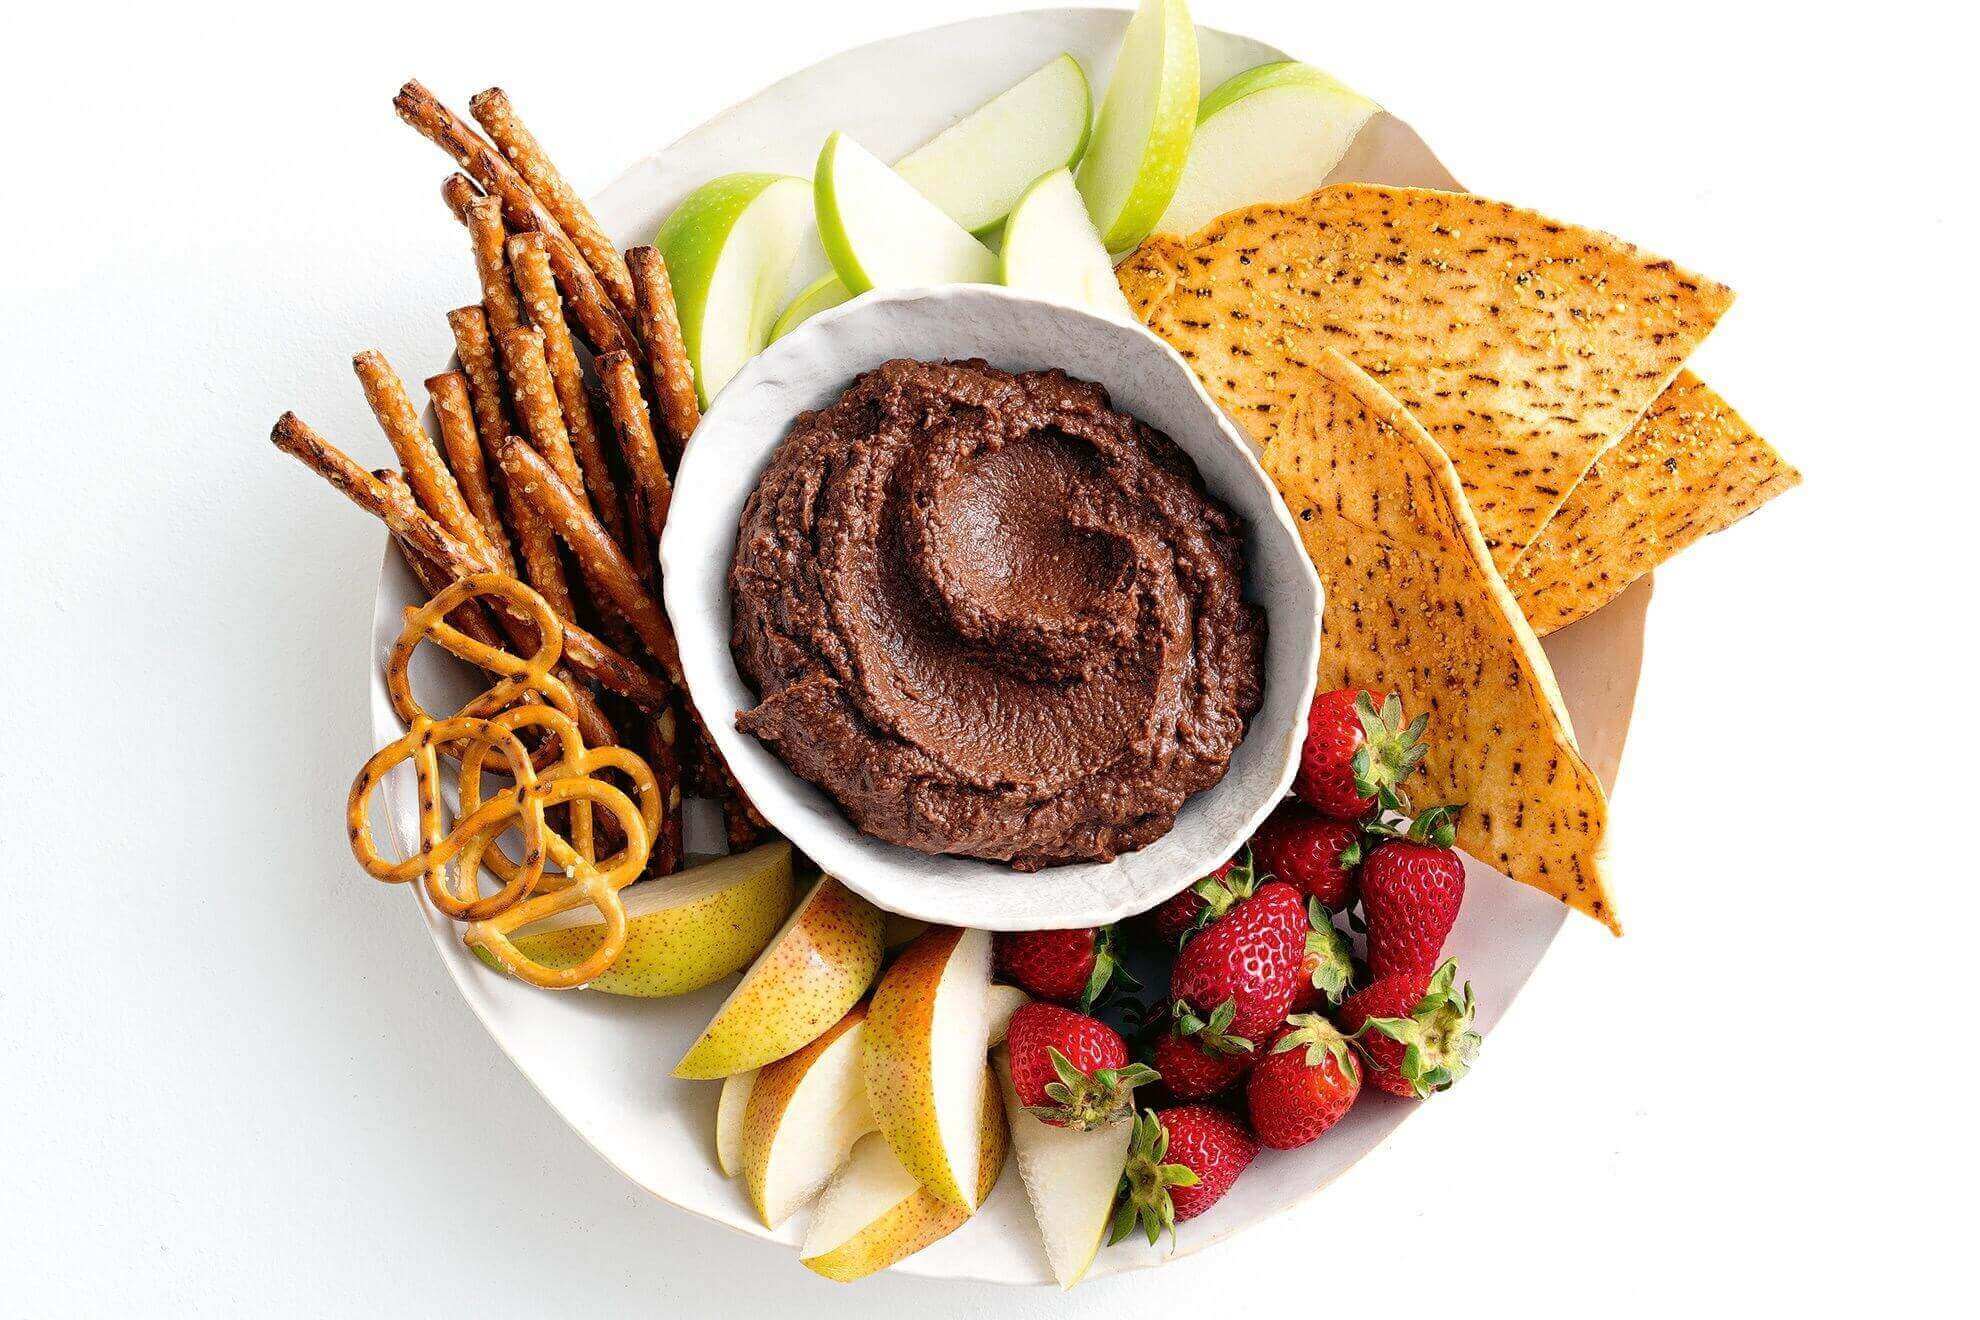 10-chocolate-hummus-nutrition-facts